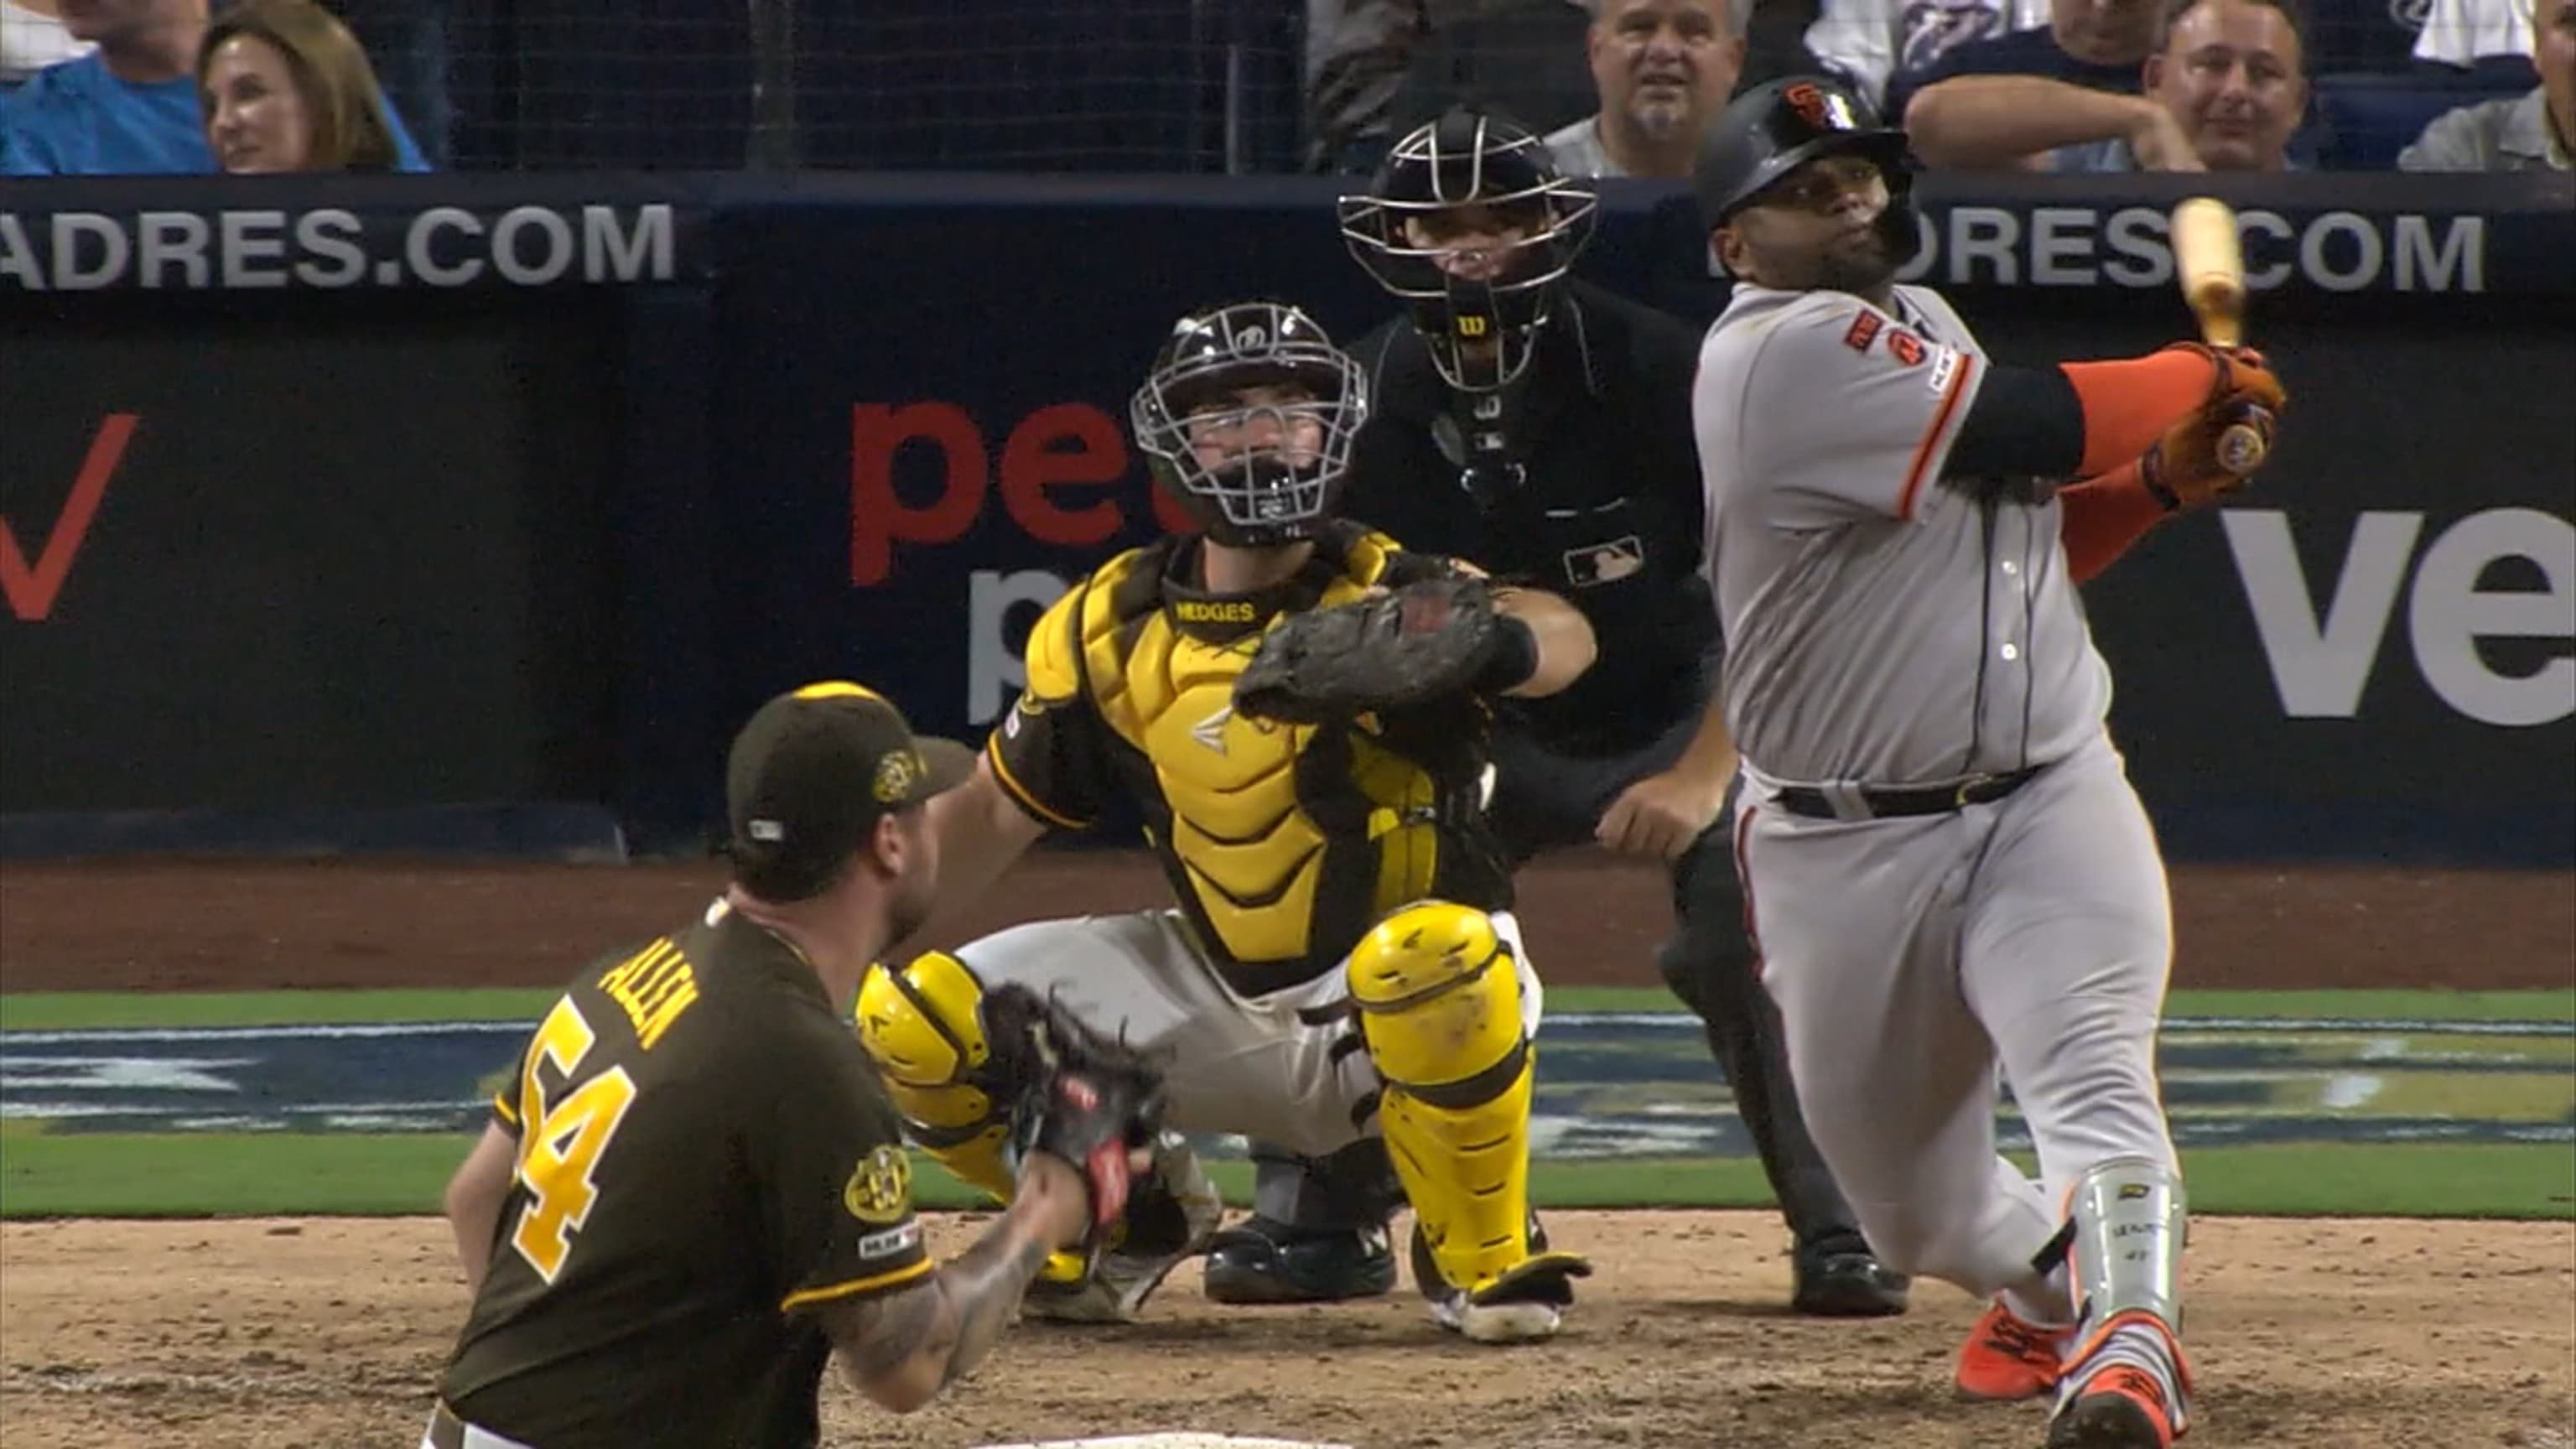 Pablo Sandoval meets baby from clutch homer